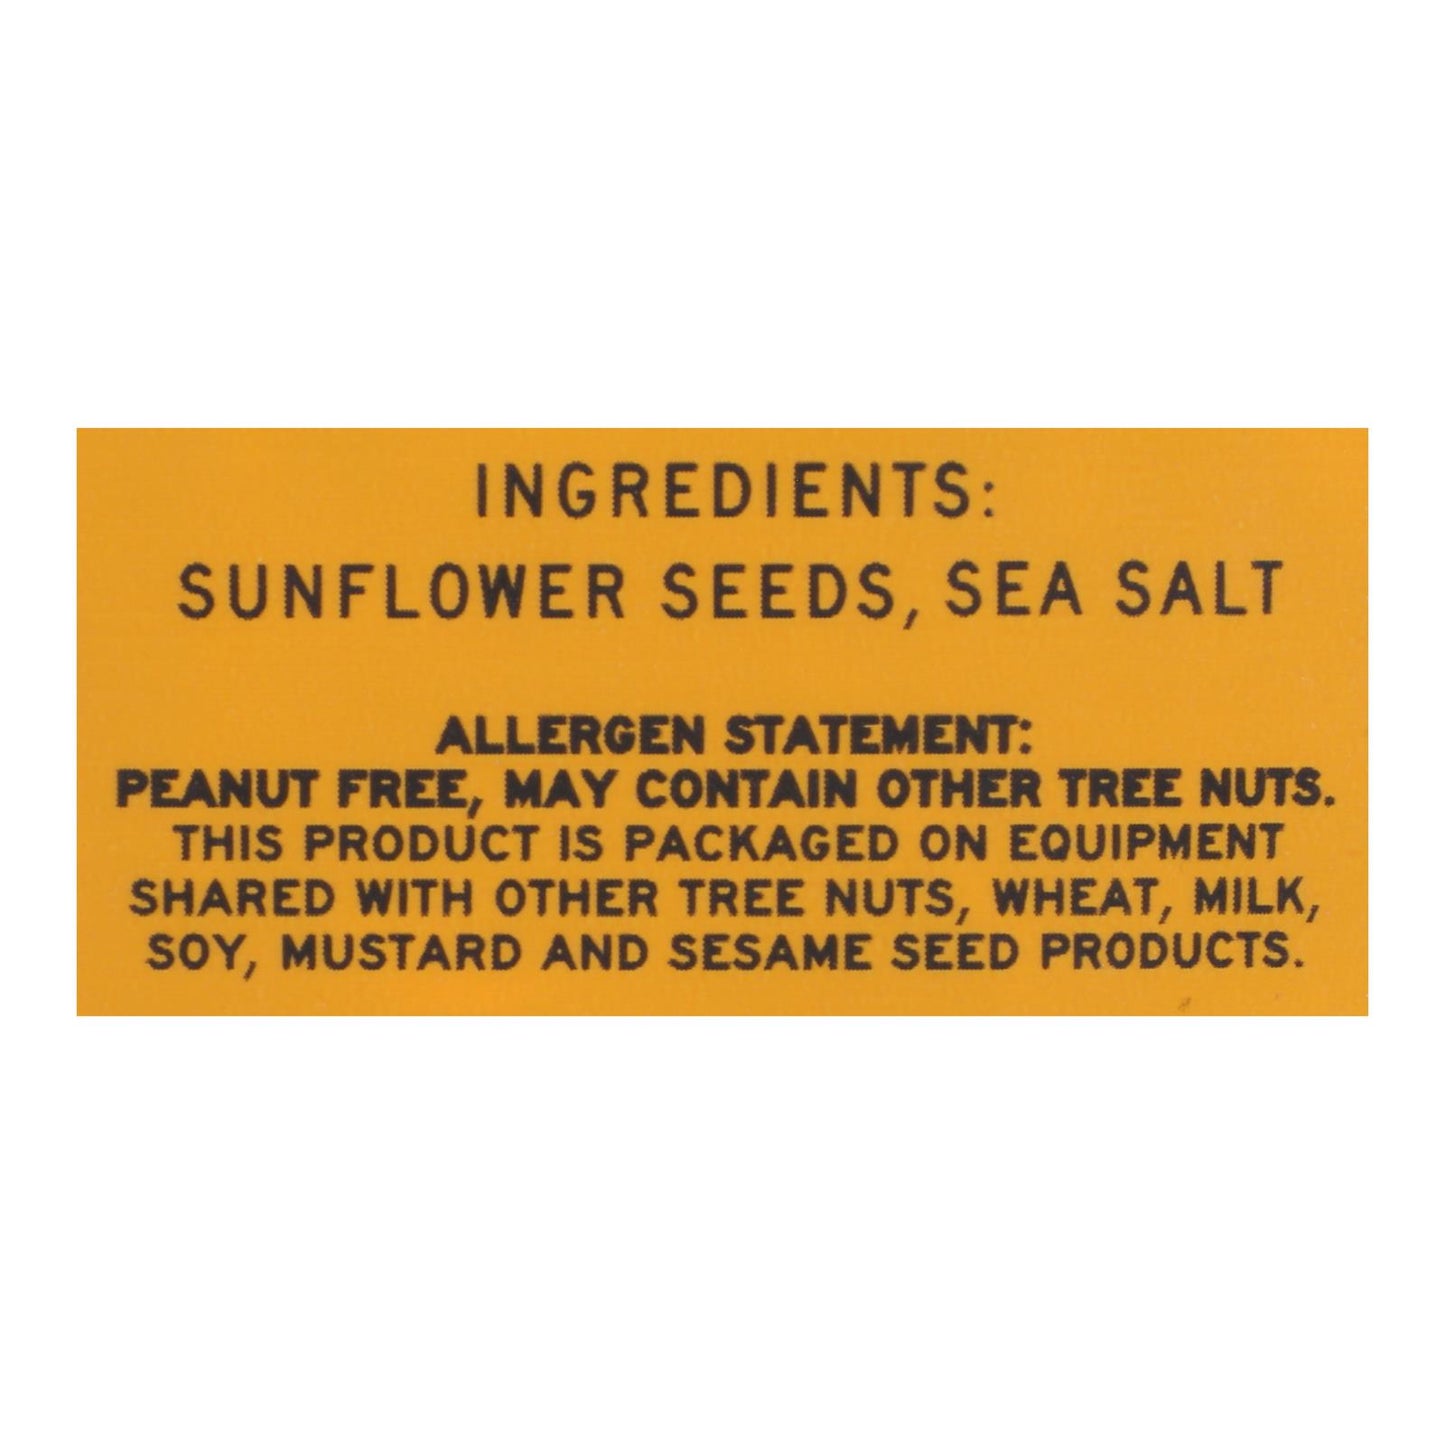 South Forty Snack Co. - Seeds Sunflower Giant Salt - Case Of 6-8 Oz